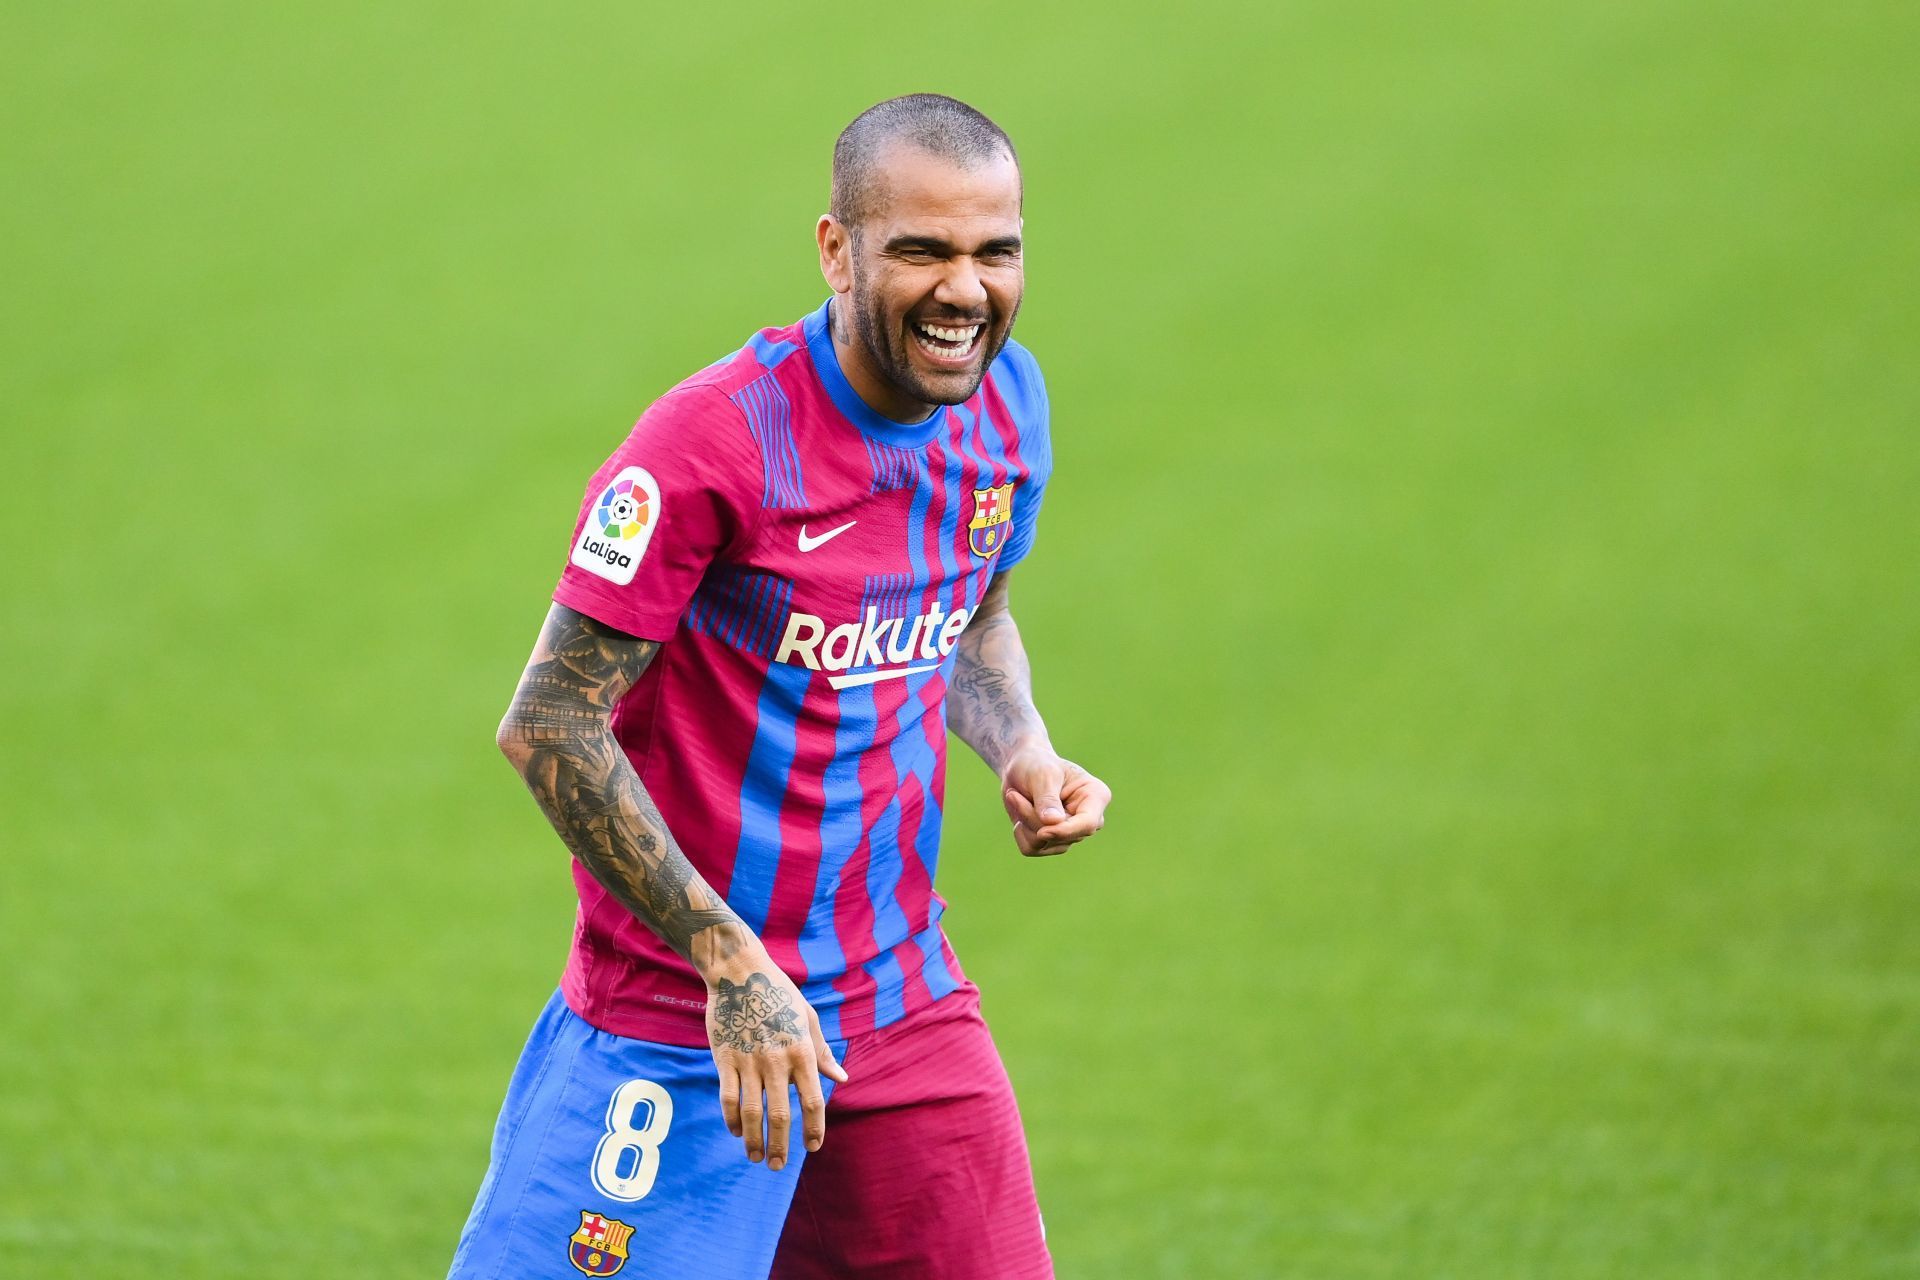 Alves rejoined under Xavi to help him stabilize the club